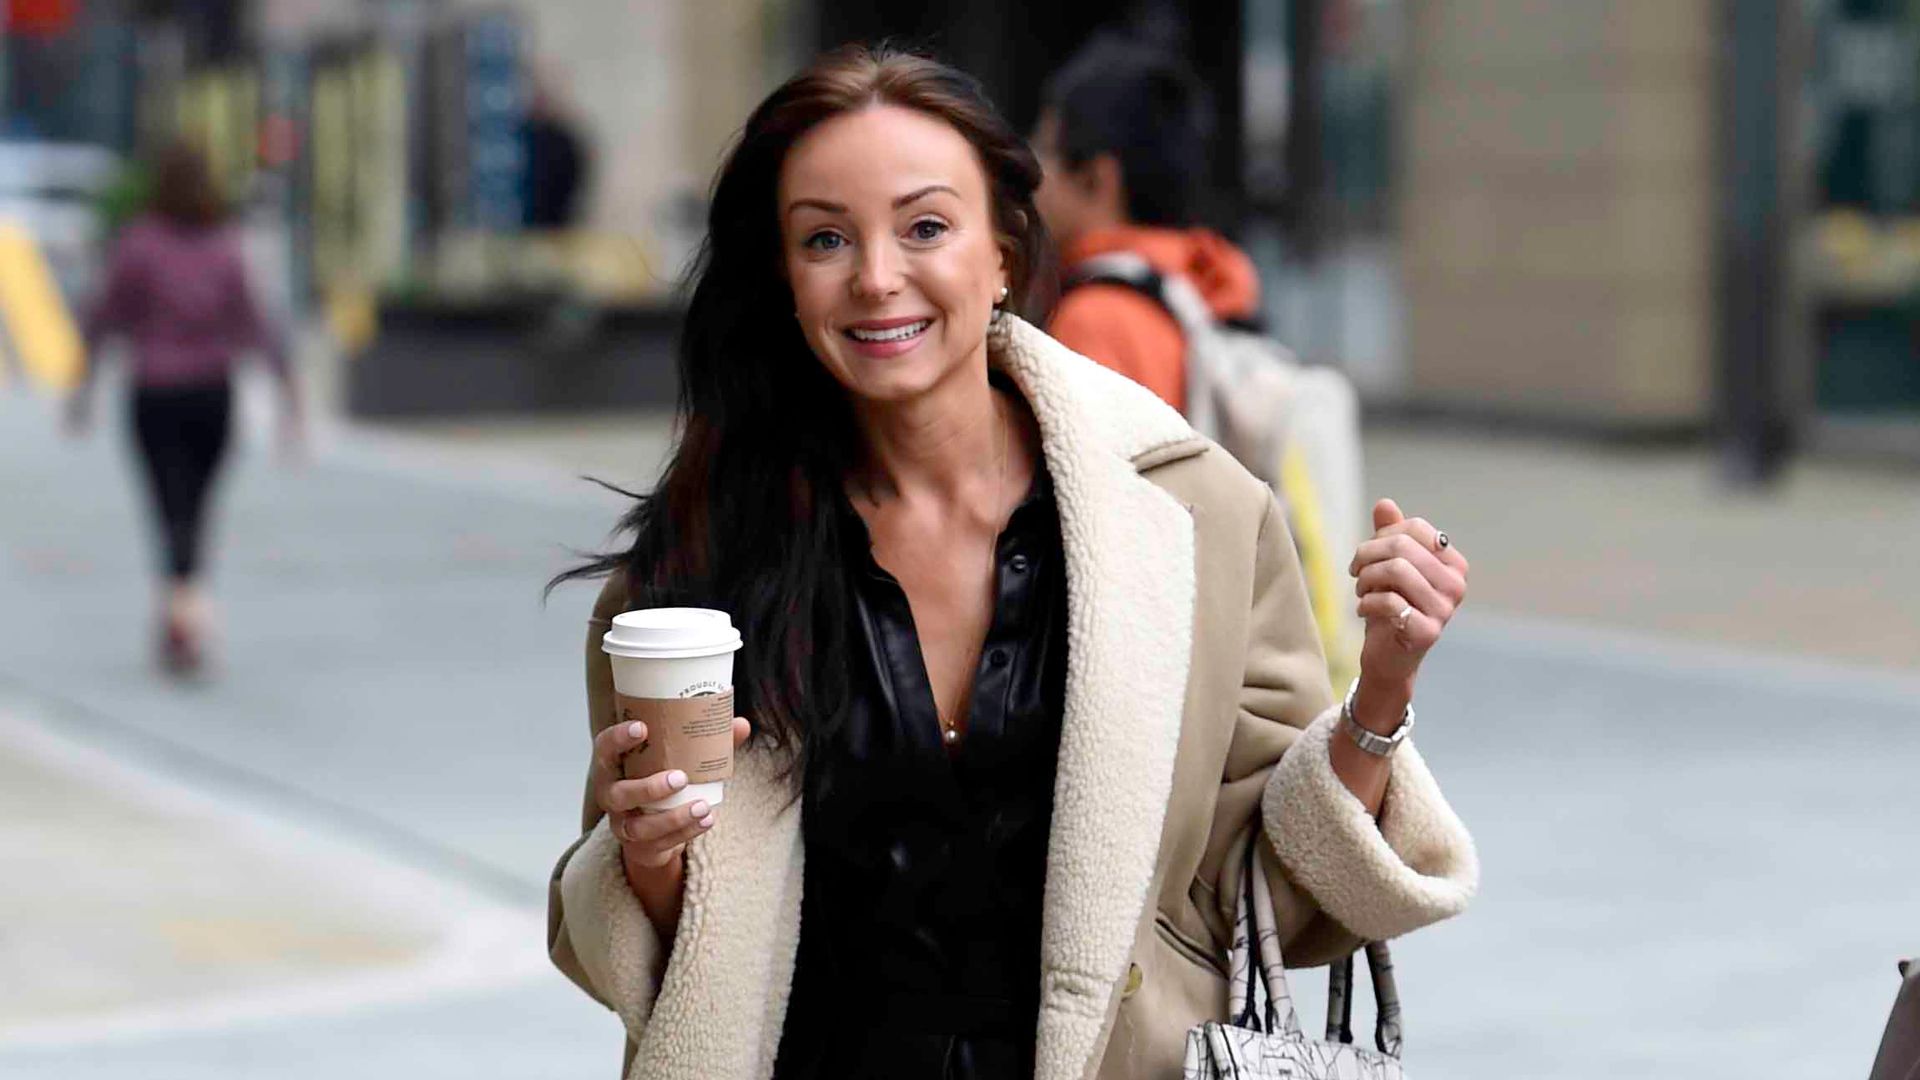 Helen George smiling in a tan coat and black dress while holding a takeaway cup